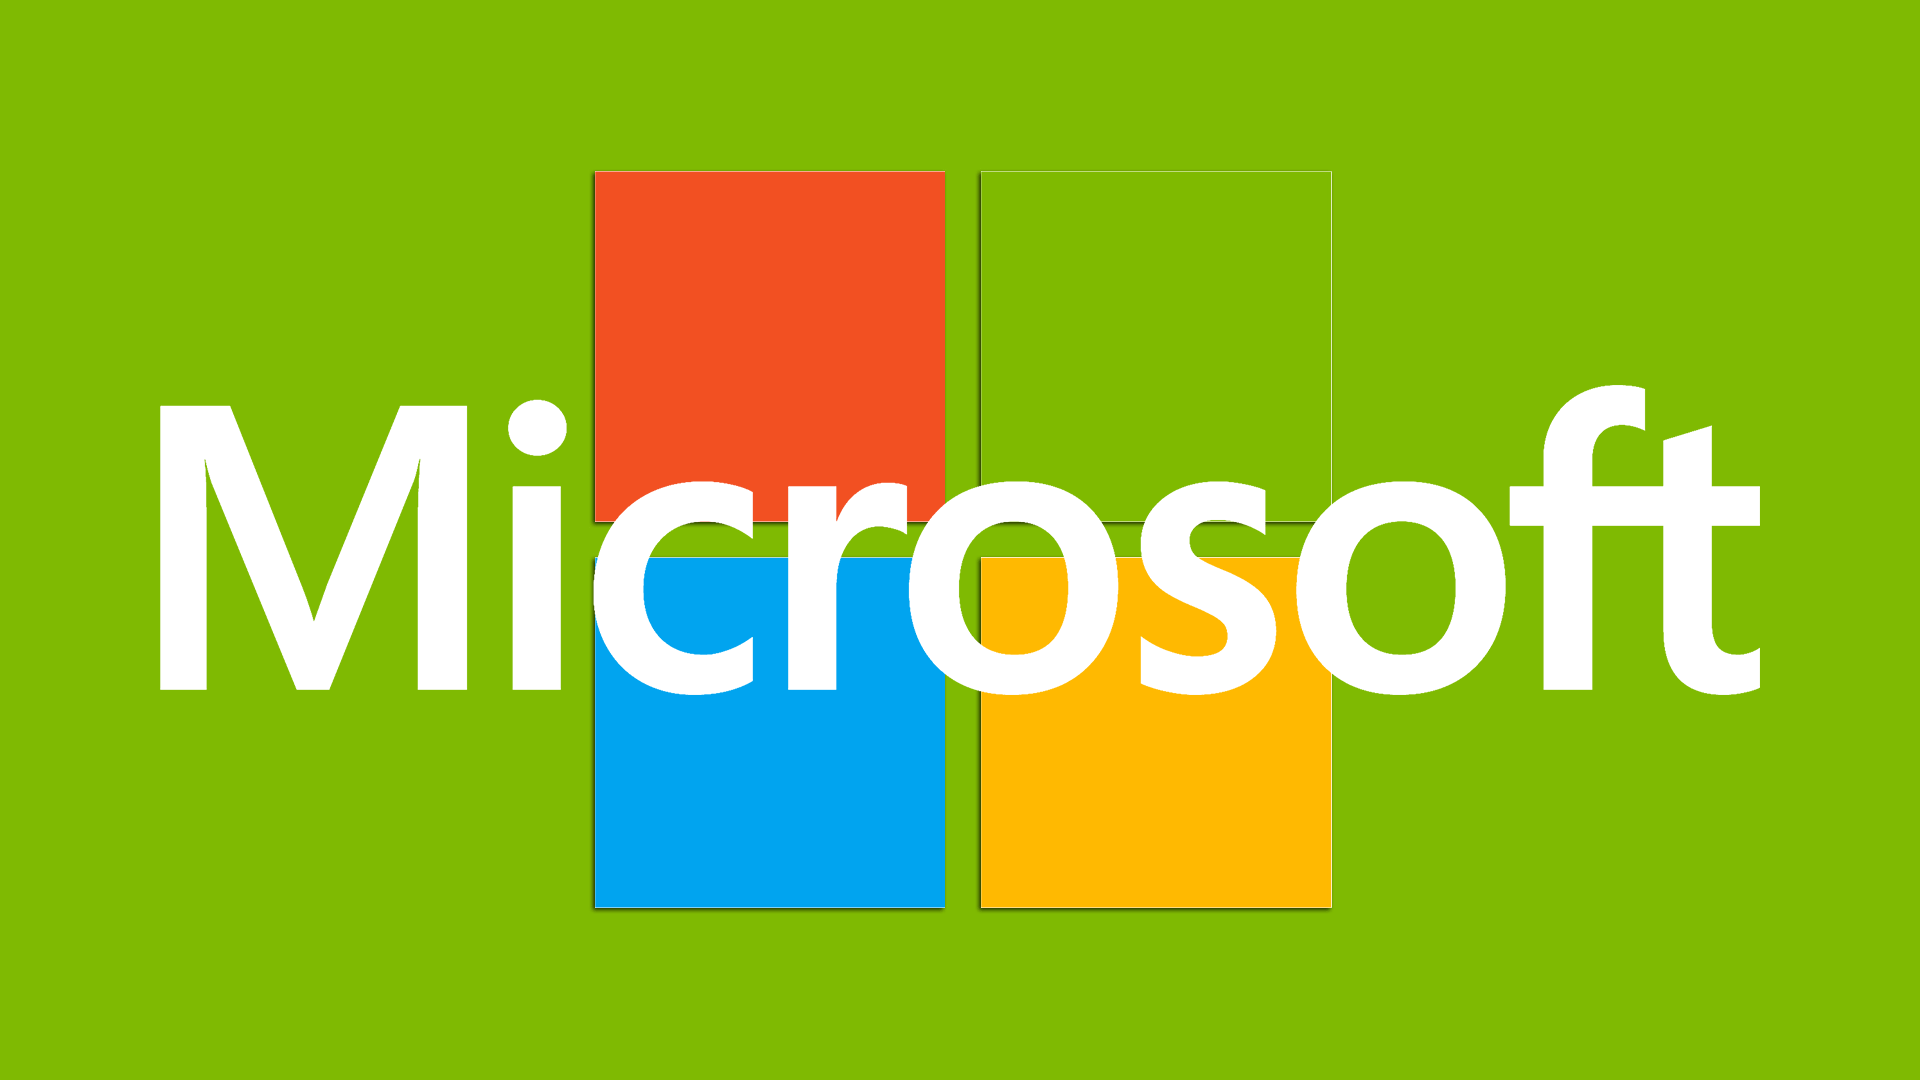 Microsoft Green Logo - Microsoft Wins 13 Bing Related Domains From Squatter